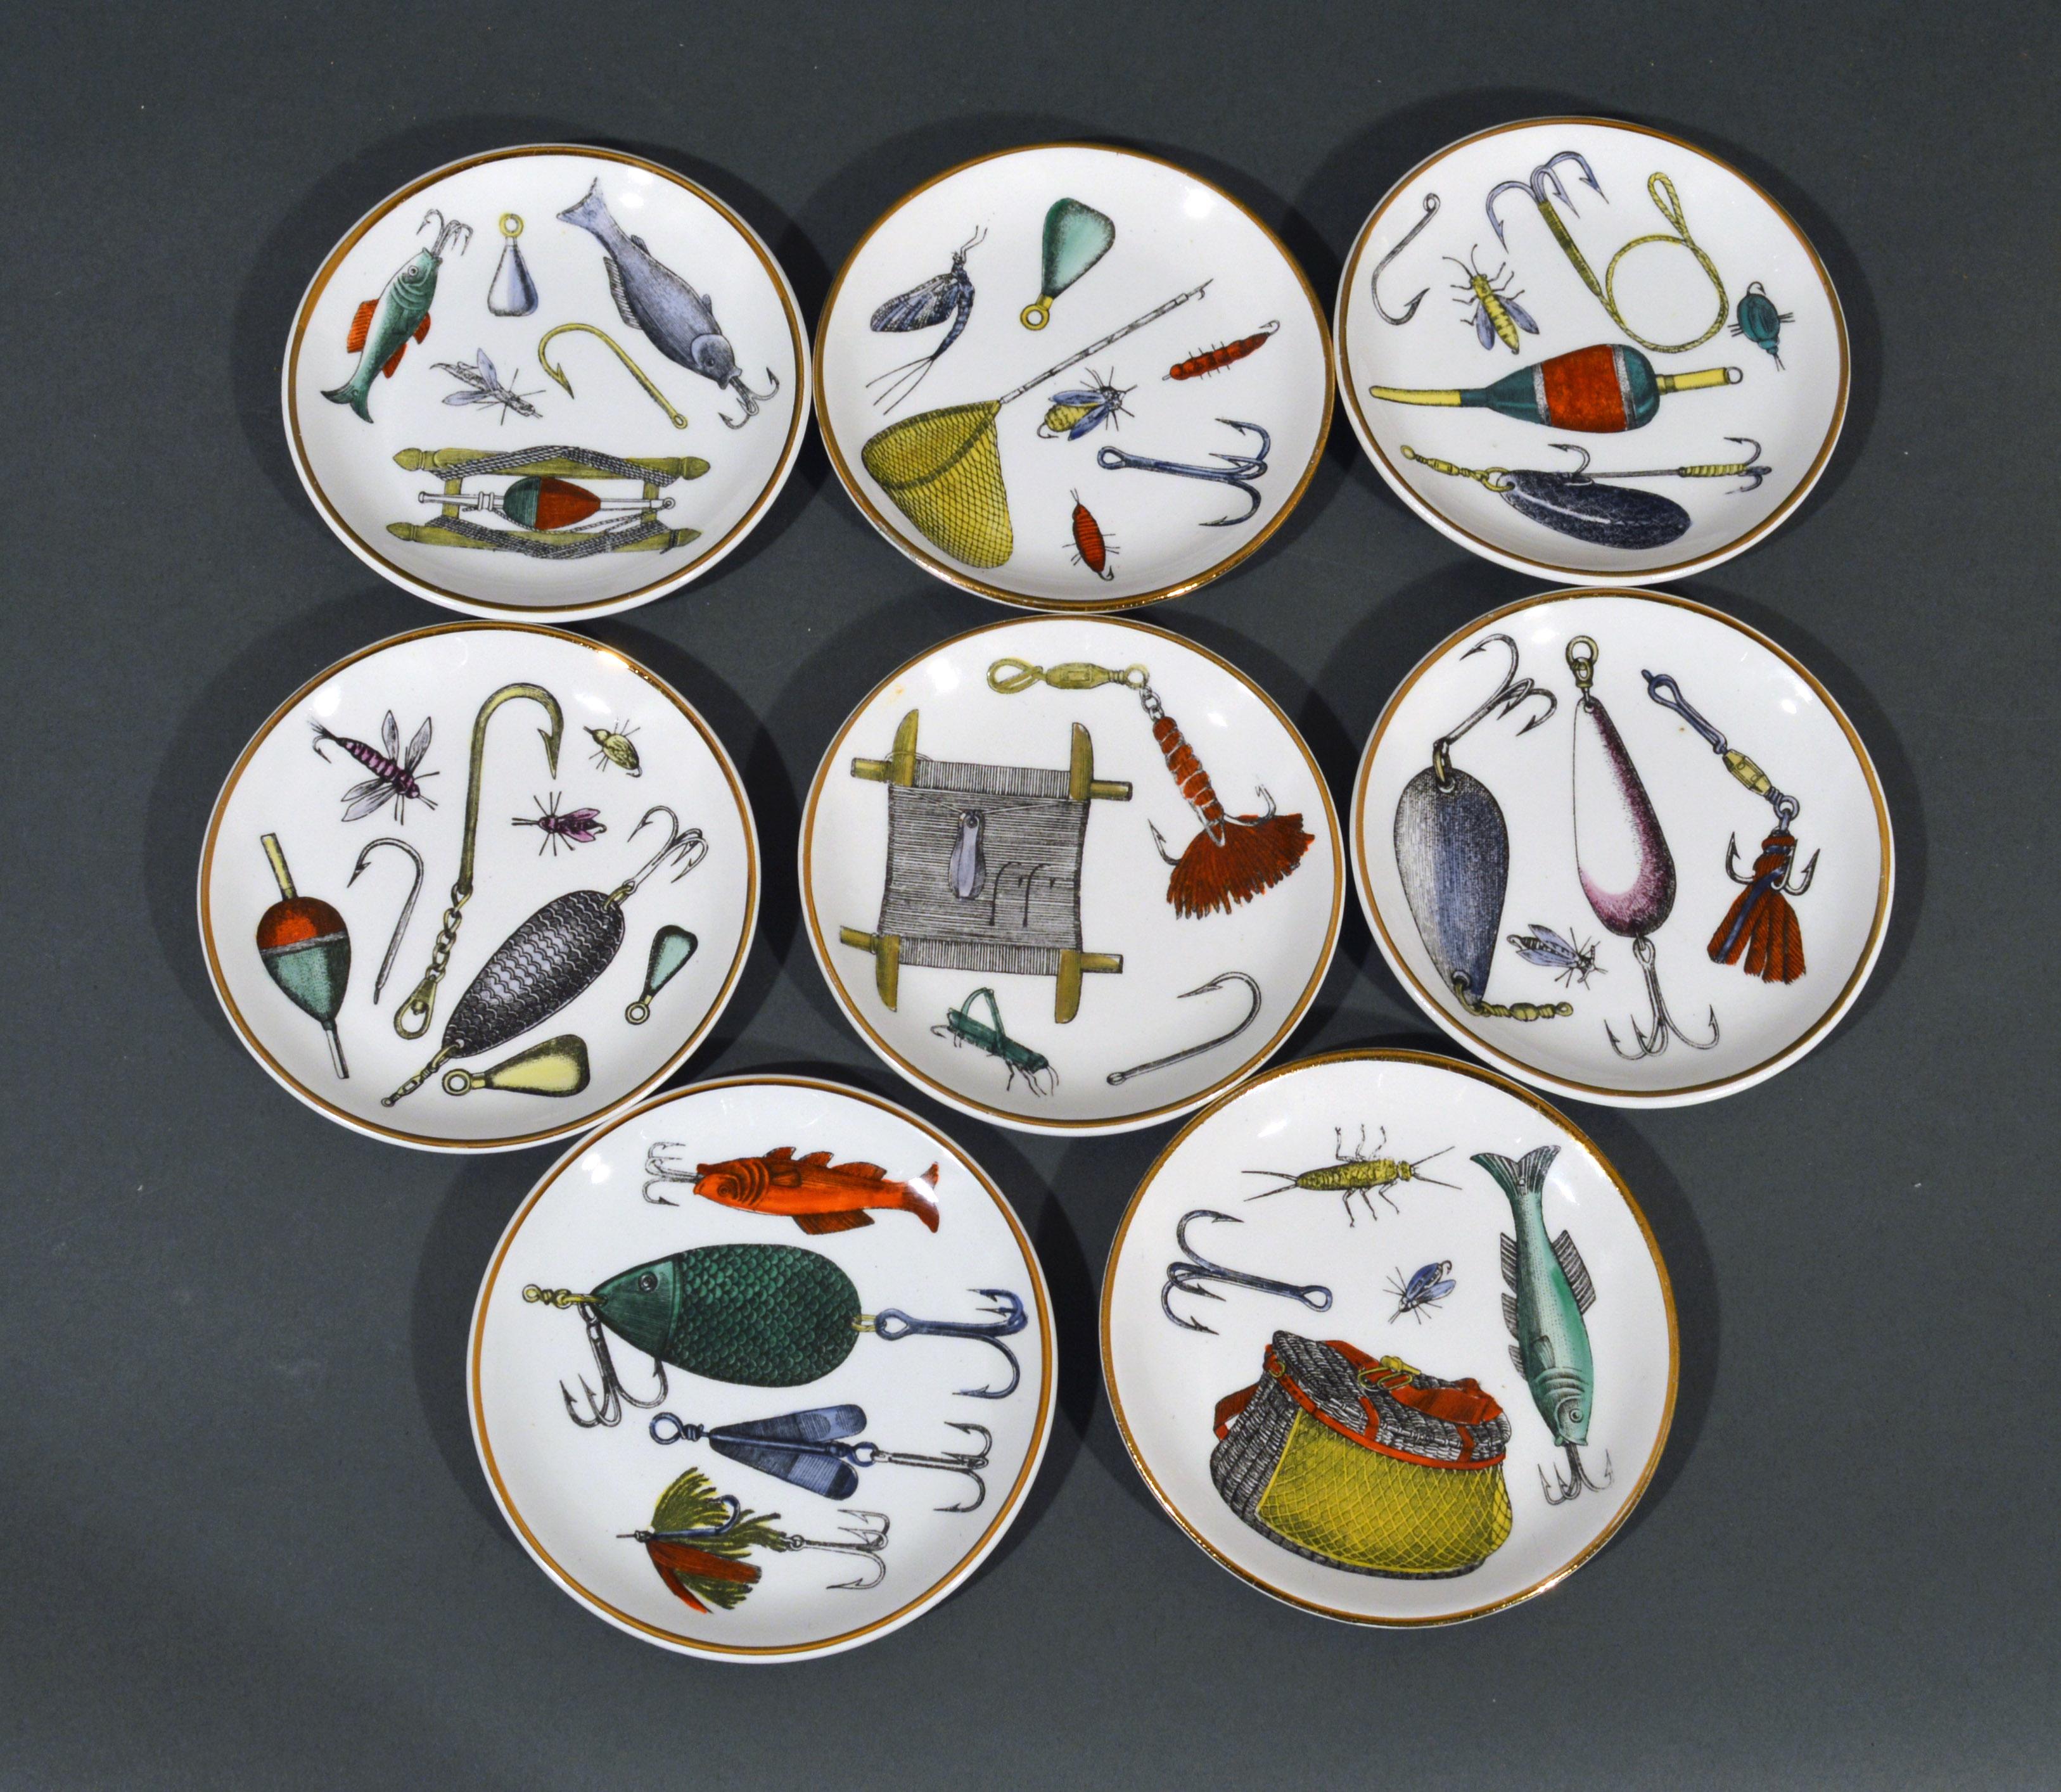 Piero Fornasetti fishing lures coaster set with original box,
La Pesca Pattern,
1960s.

A full set of eight coasters or small dishes each decorated with the rare pattern of fishing lures and fishing tools such as nets and bags. All within a gold